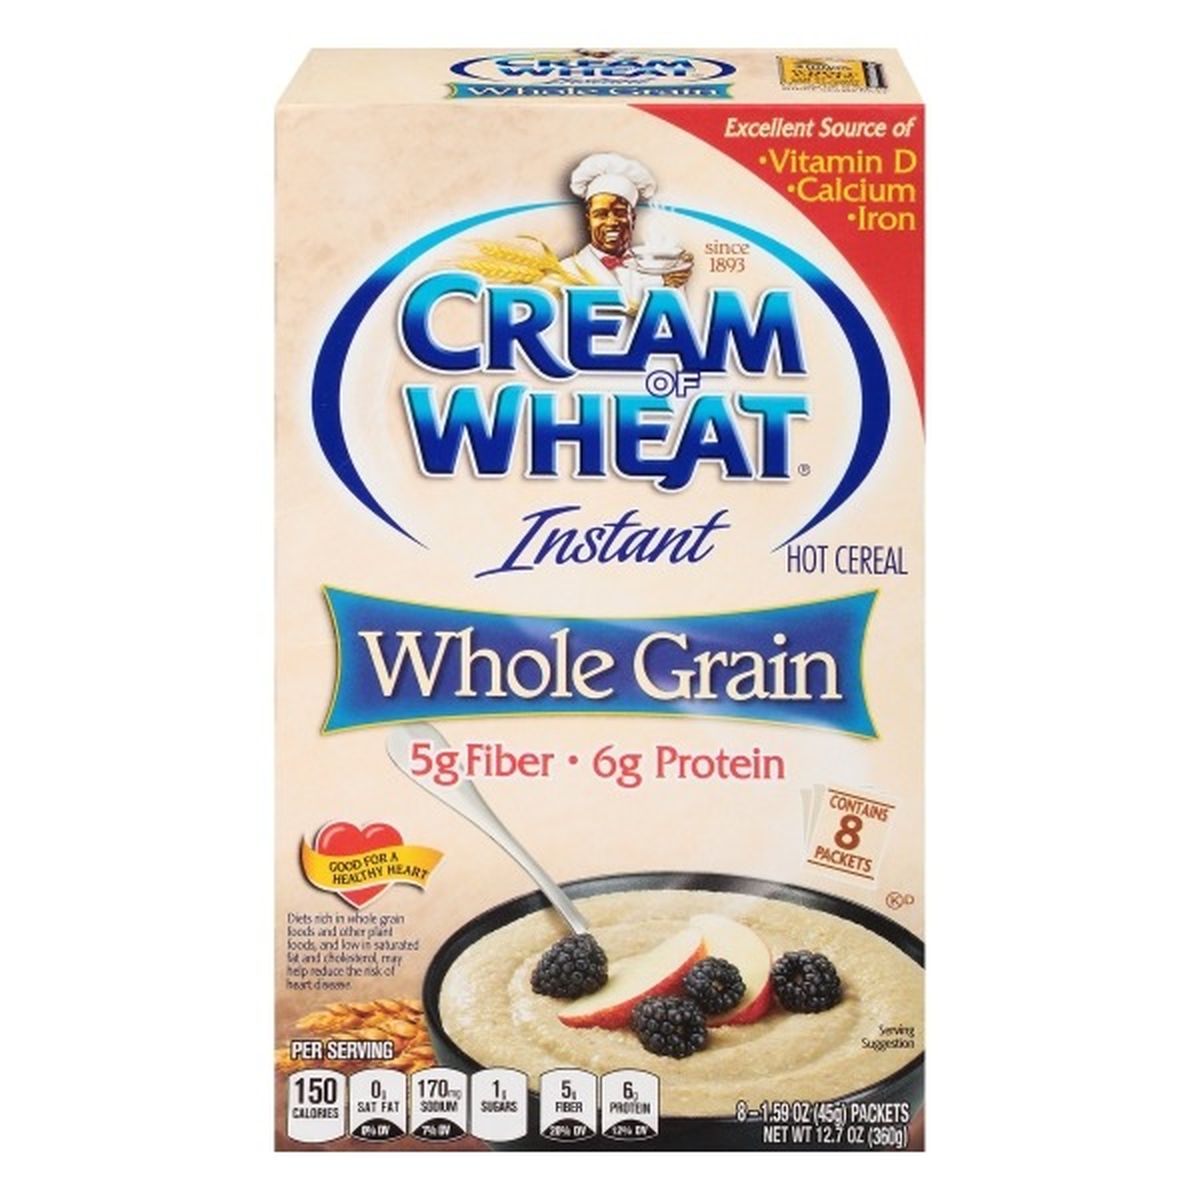 Calories in Cream of Wheat Hot Cereal, Whole Grain, Instant